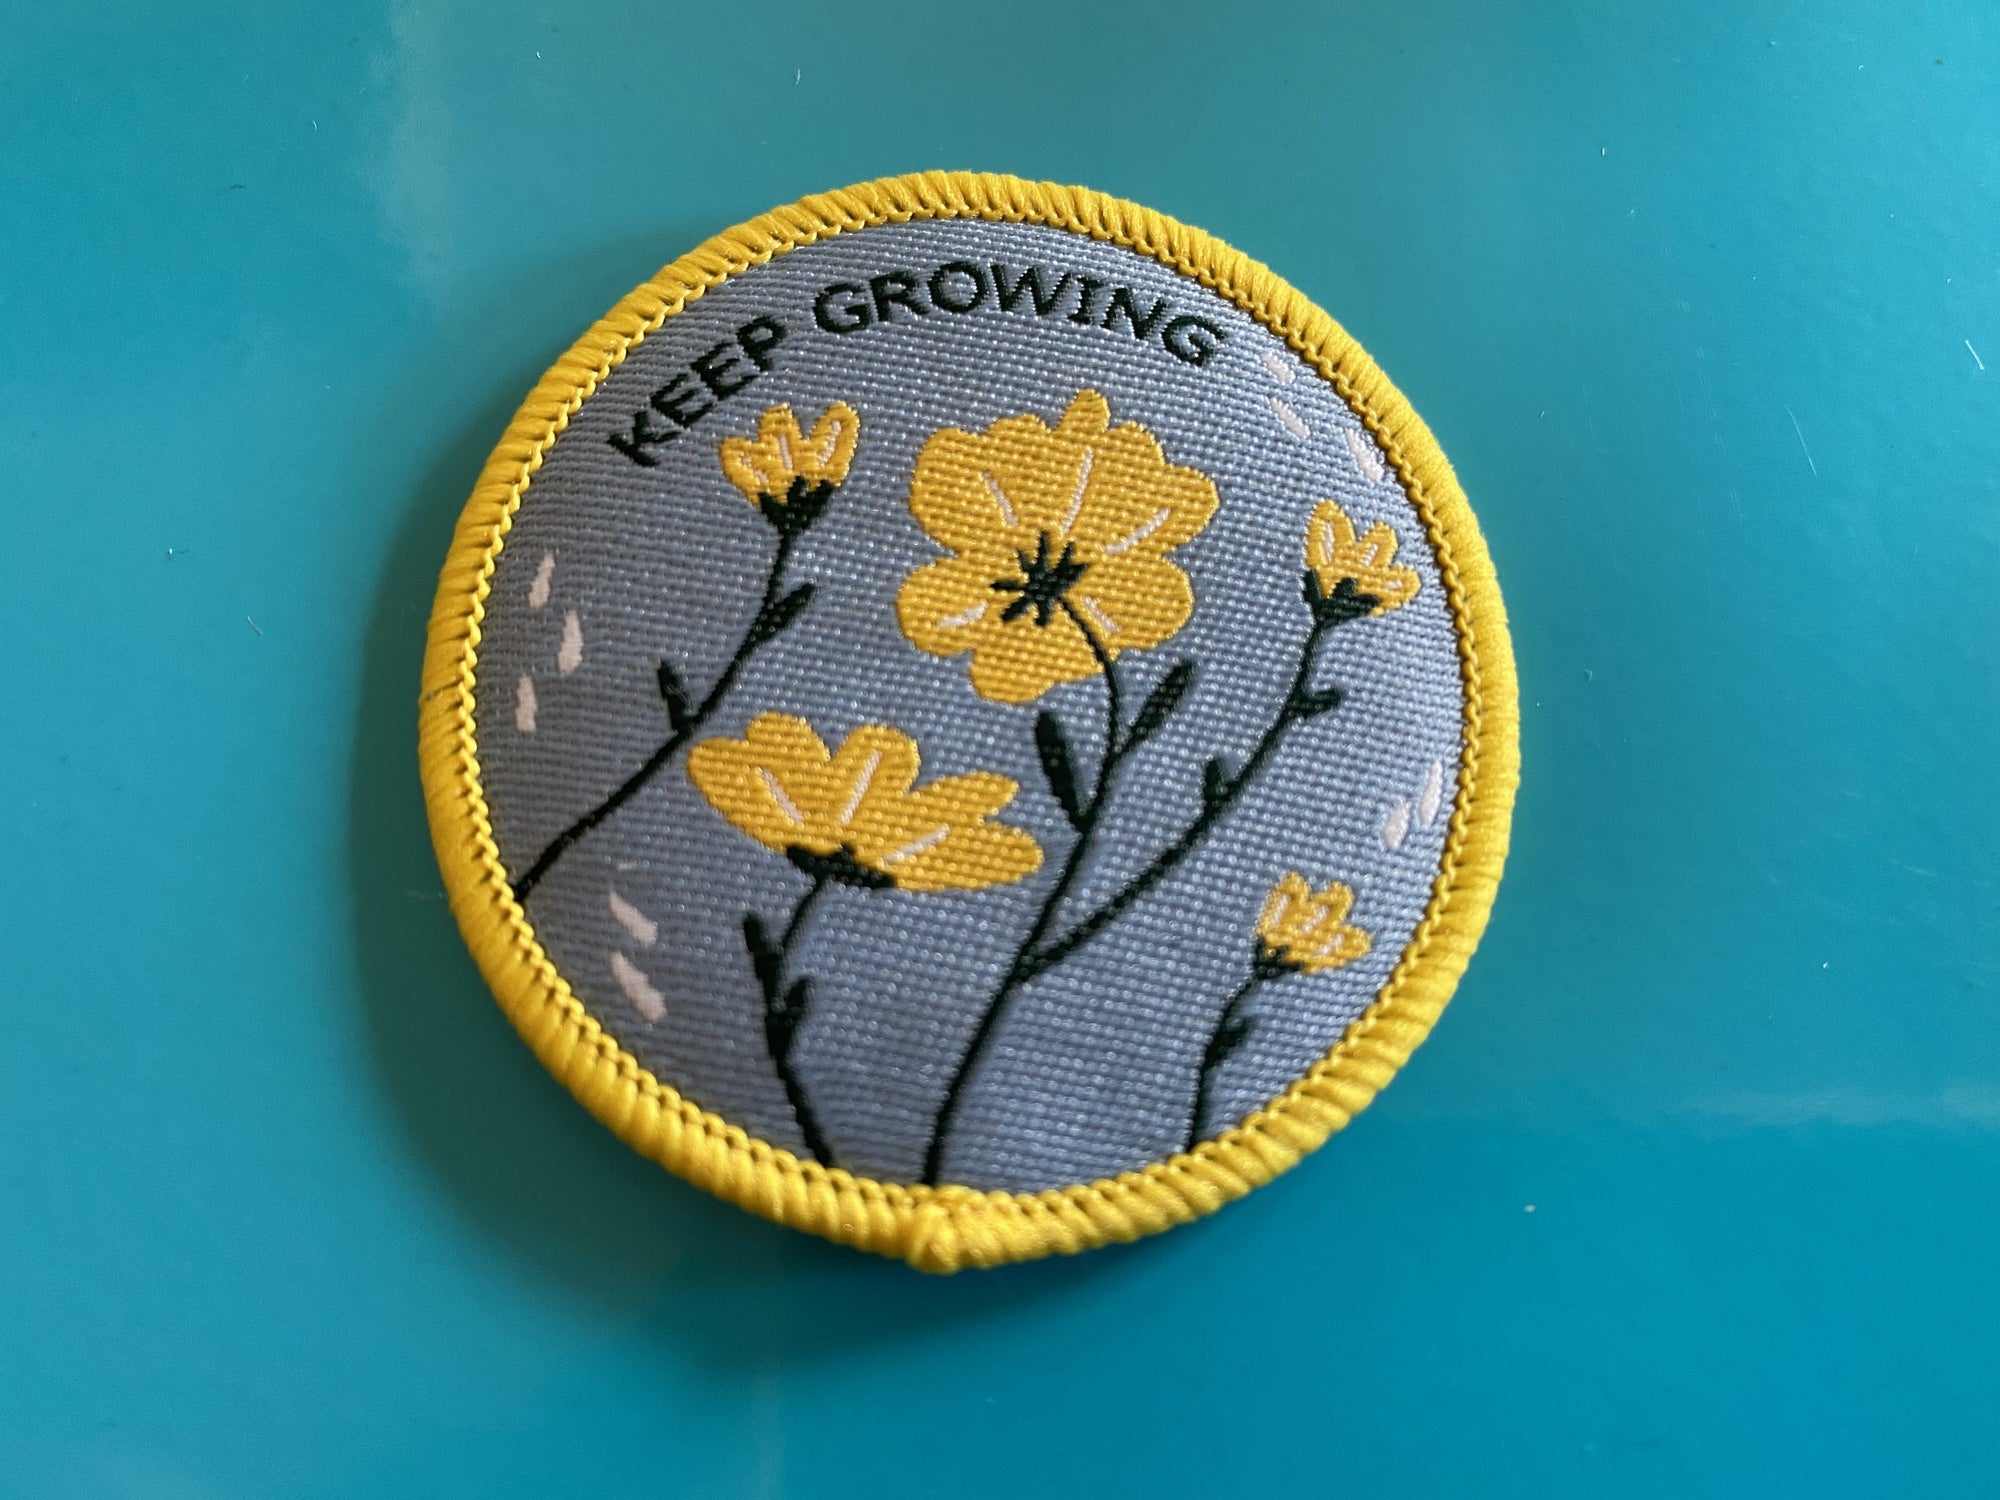 Patch - Keep Growing